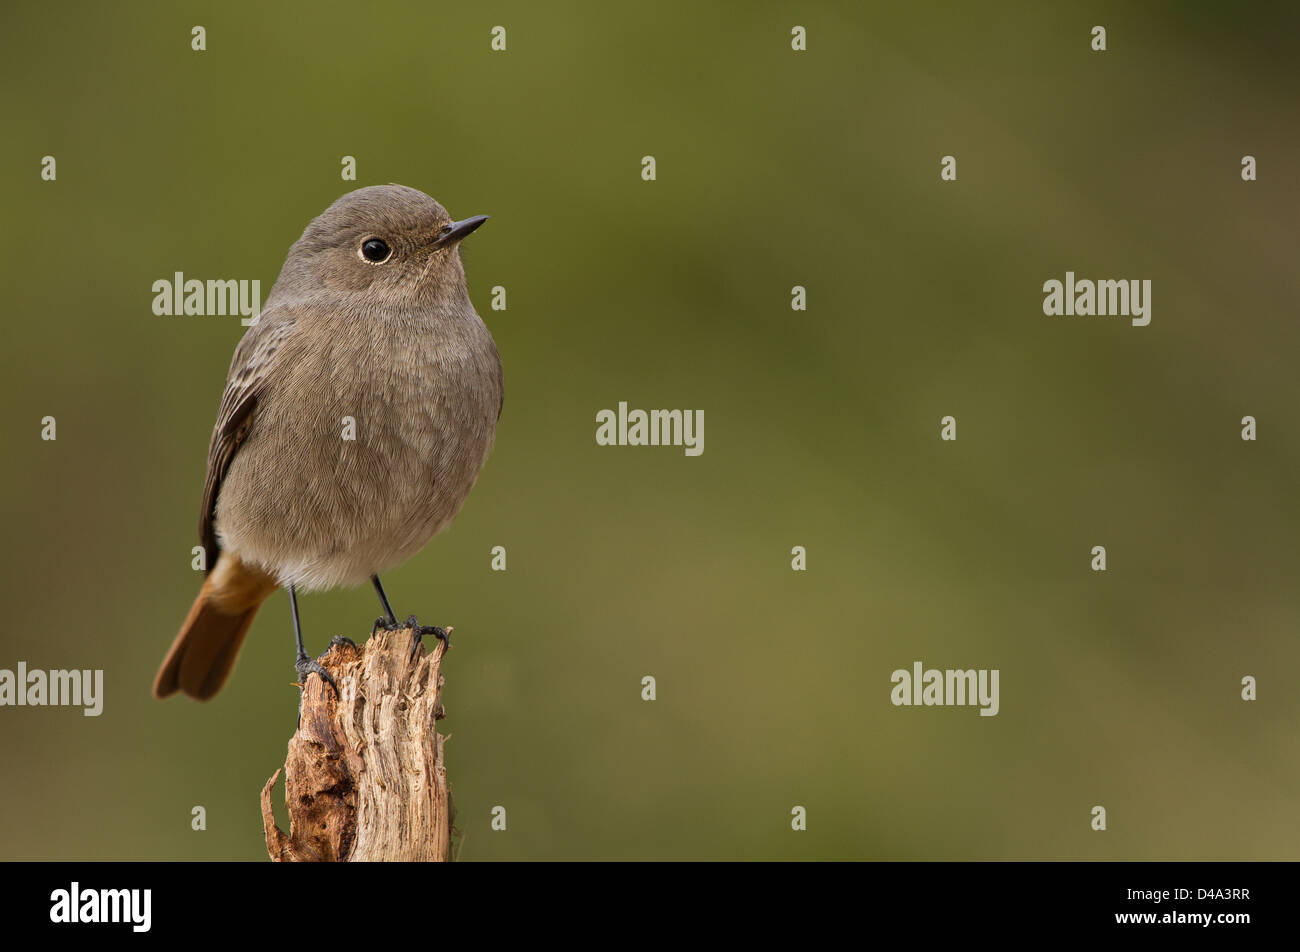 Black redstart female in the wild with green background Stock Photo